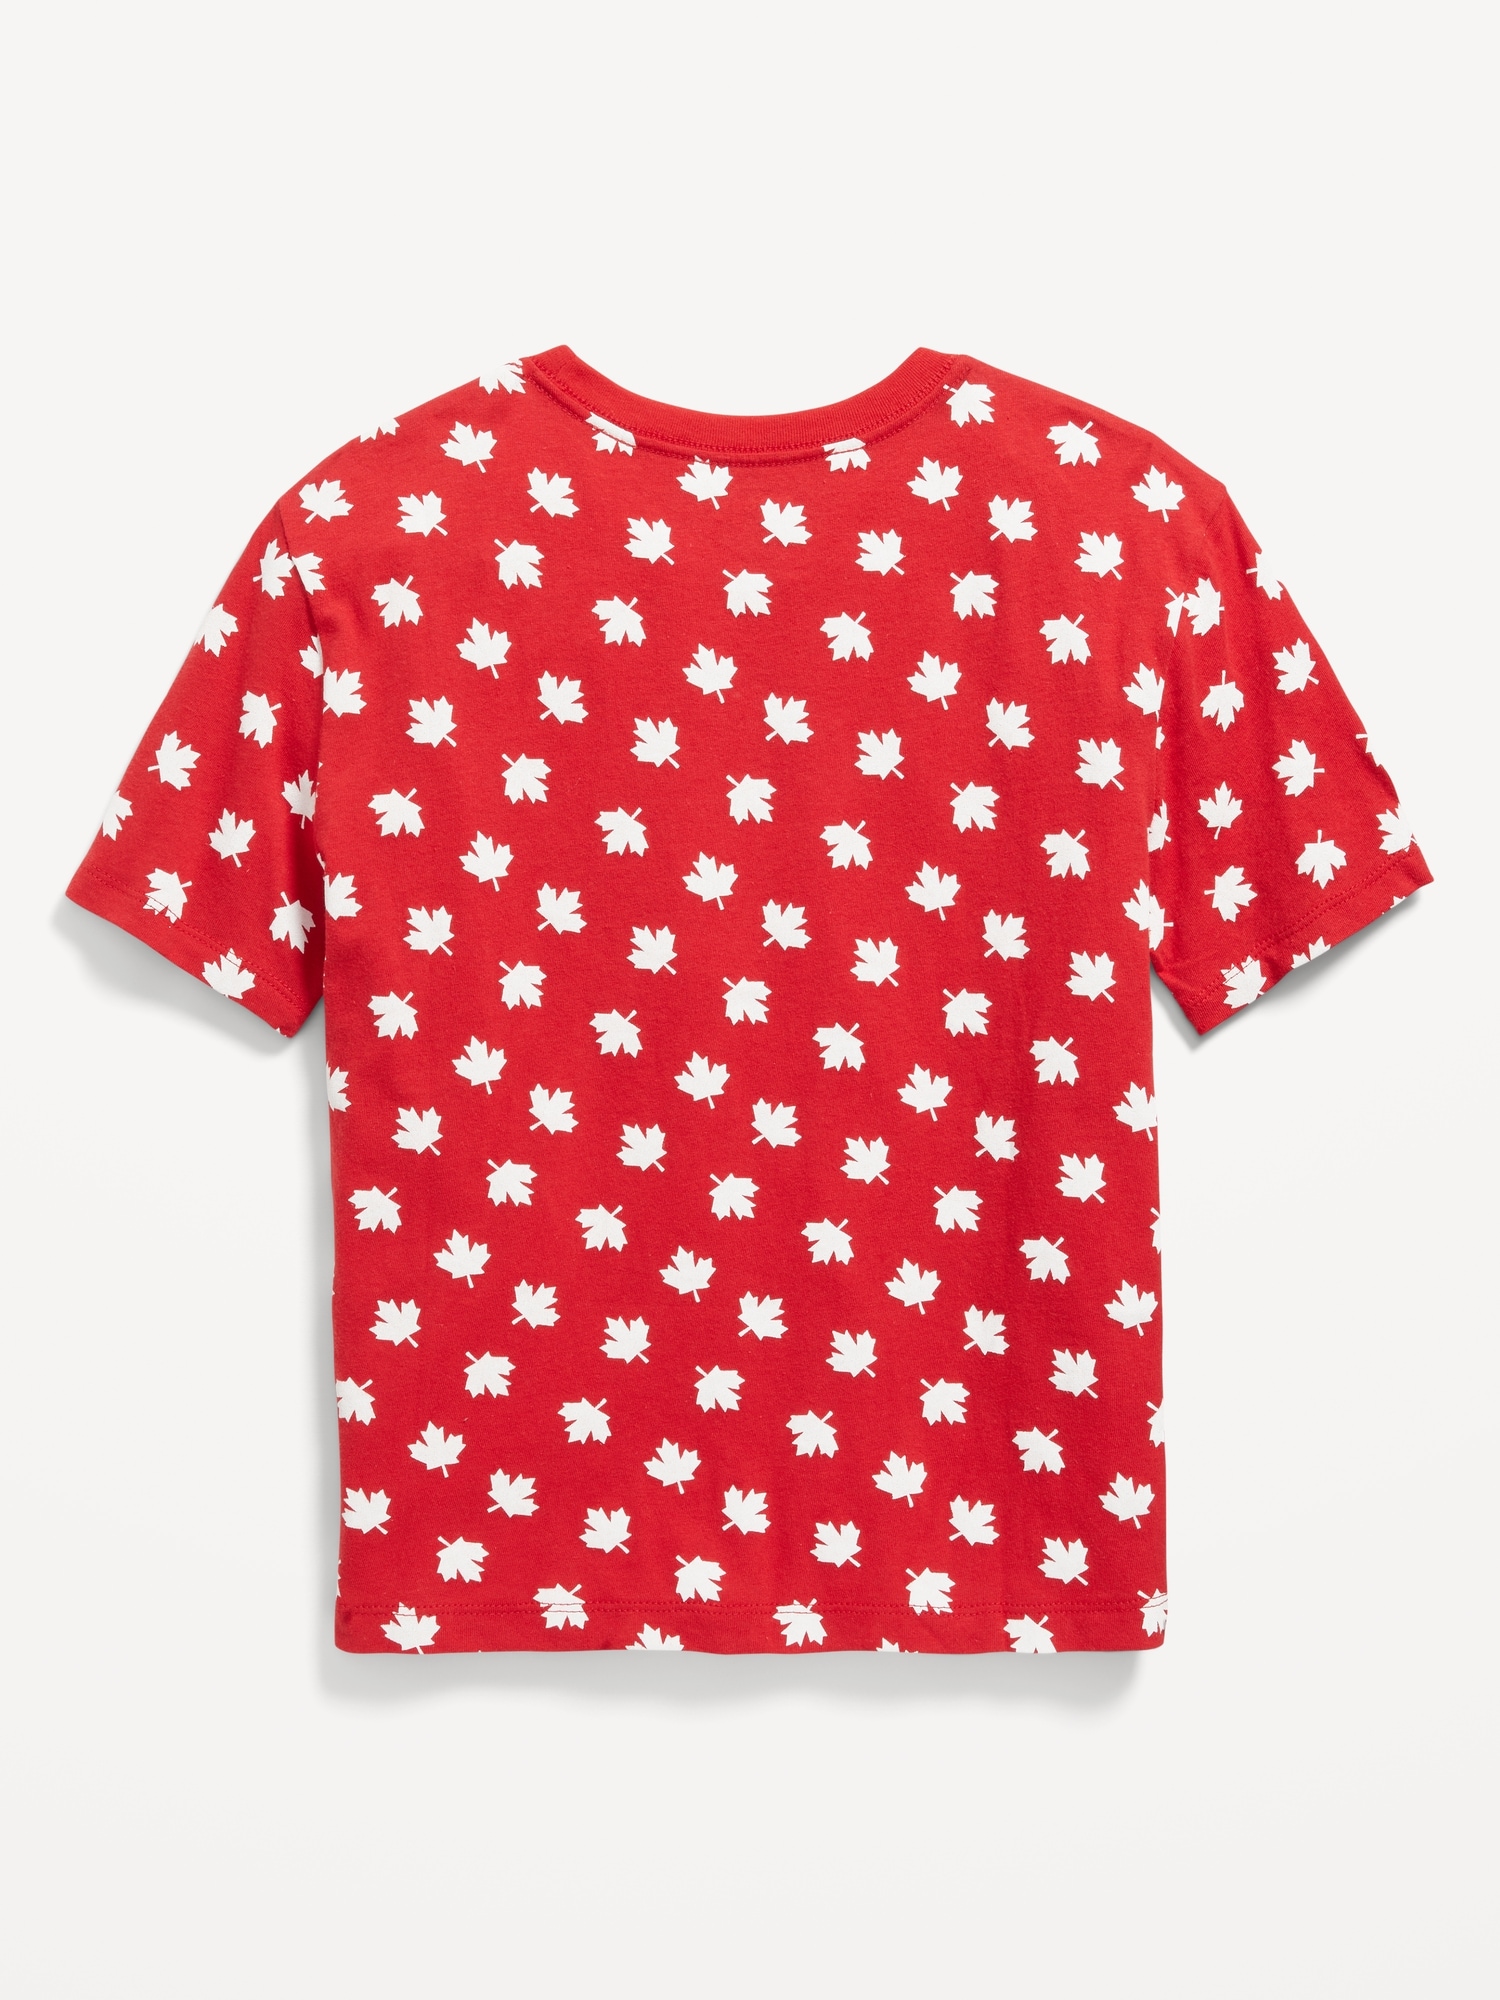 Printed Softest Crew-Neck T-Shirt for Boys